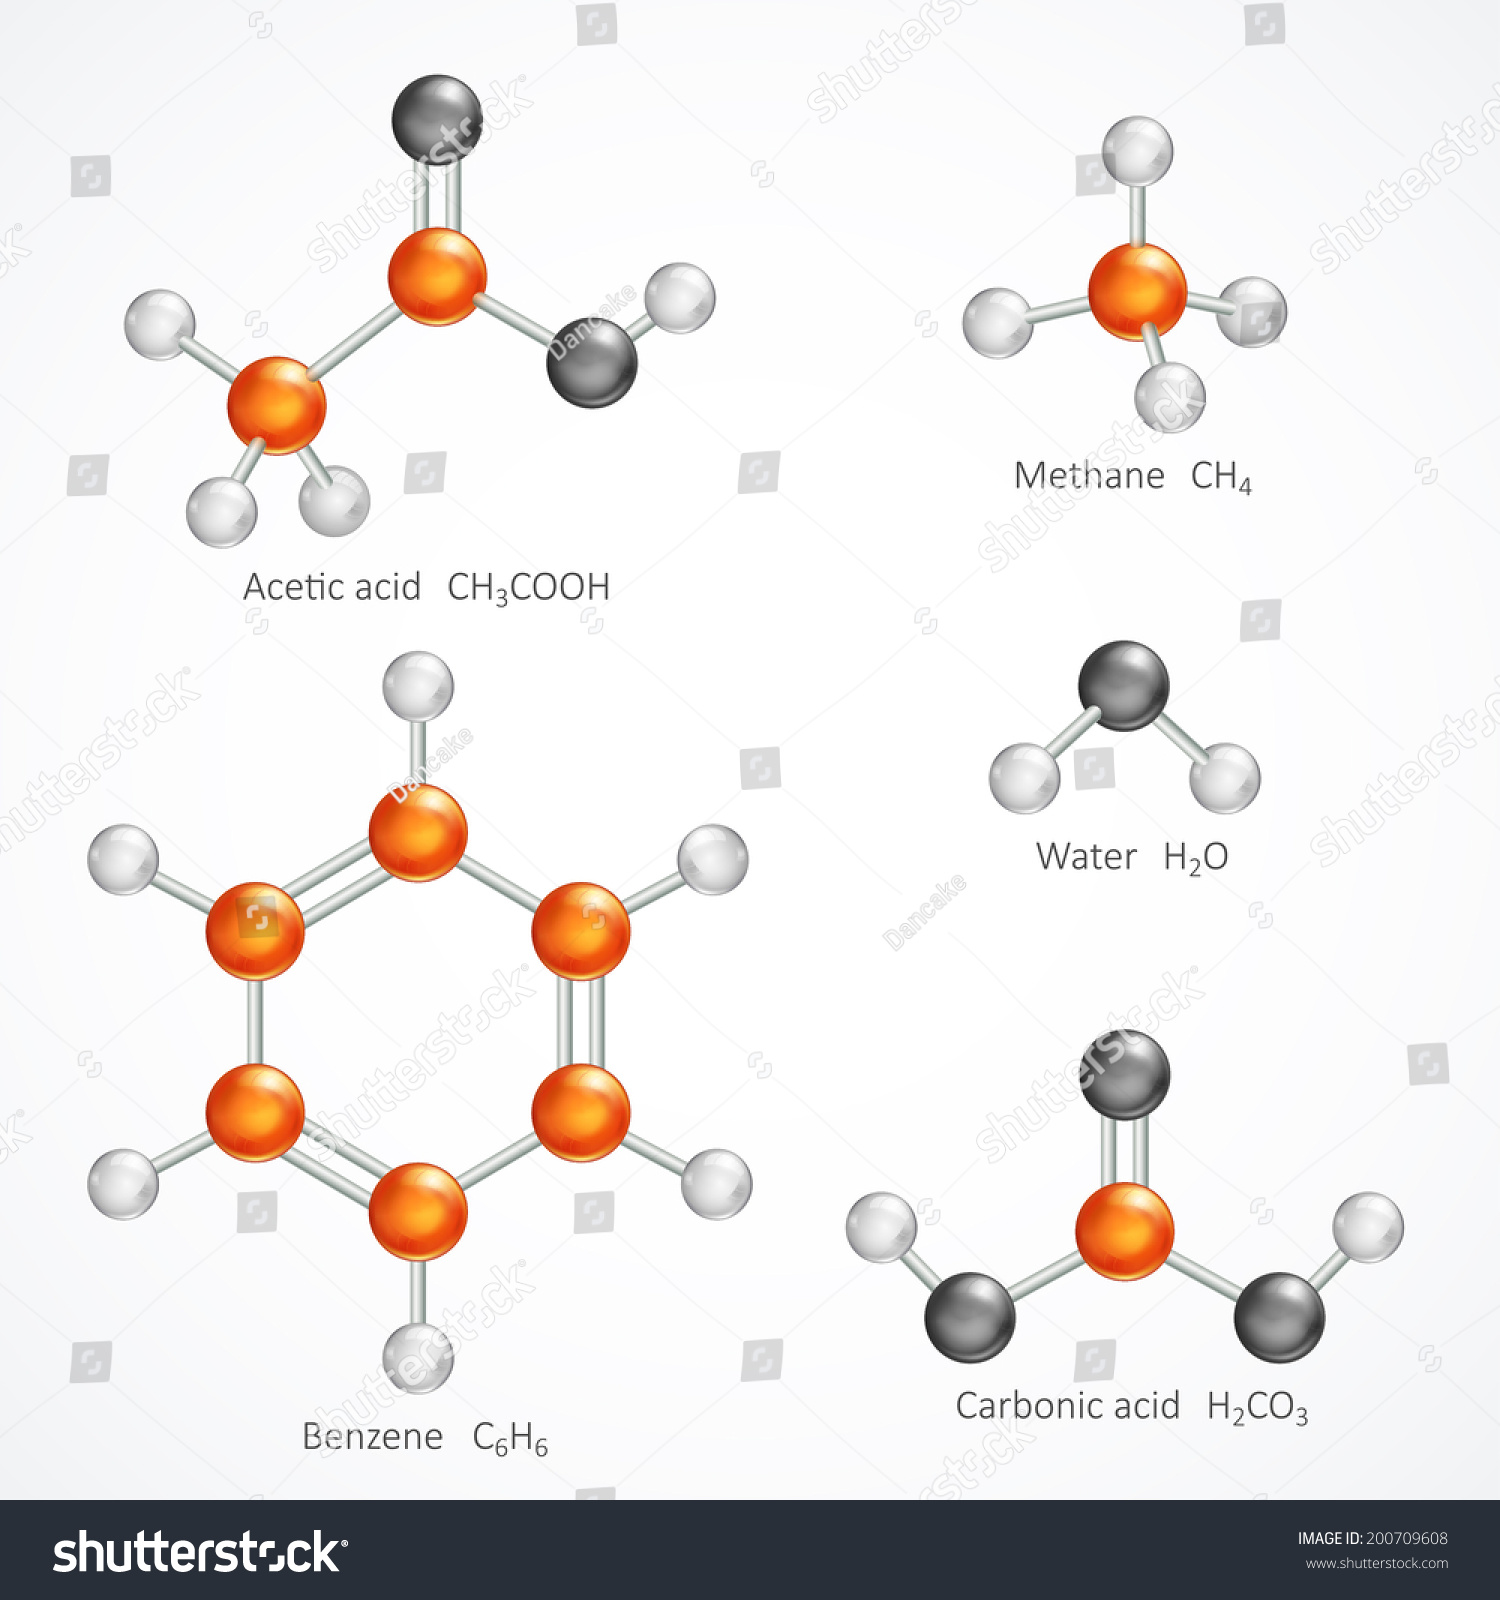 Illustration Of 3d Molecular Structure, Ball And Stick Molecule Model ...